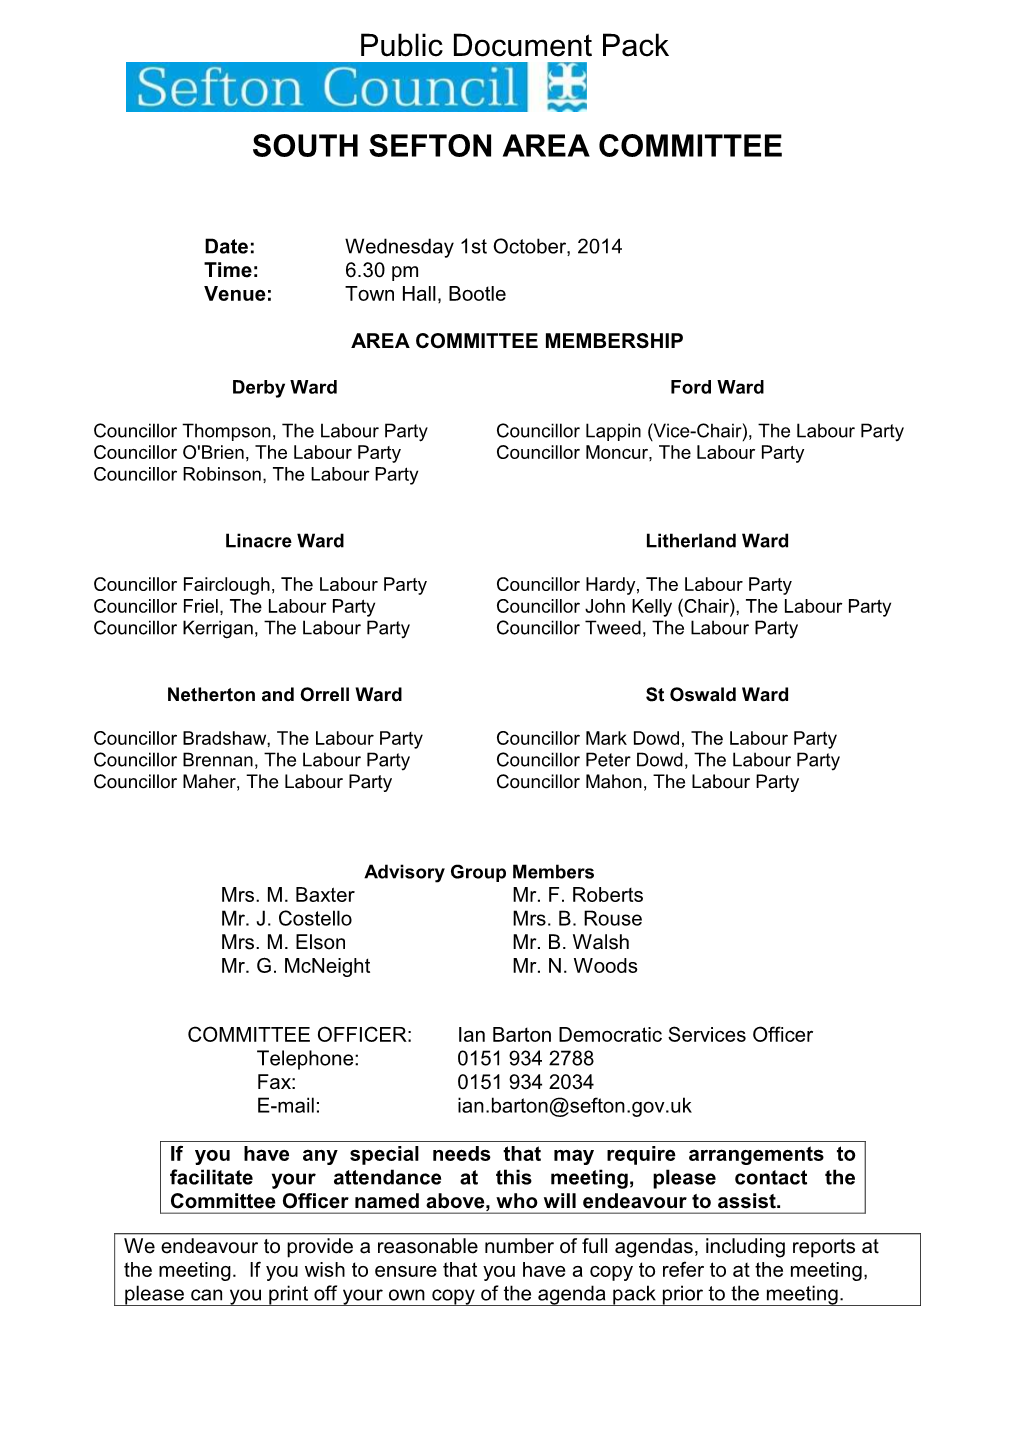 (Public Pack)Agenda Document for South Sefton Area Committee, 01